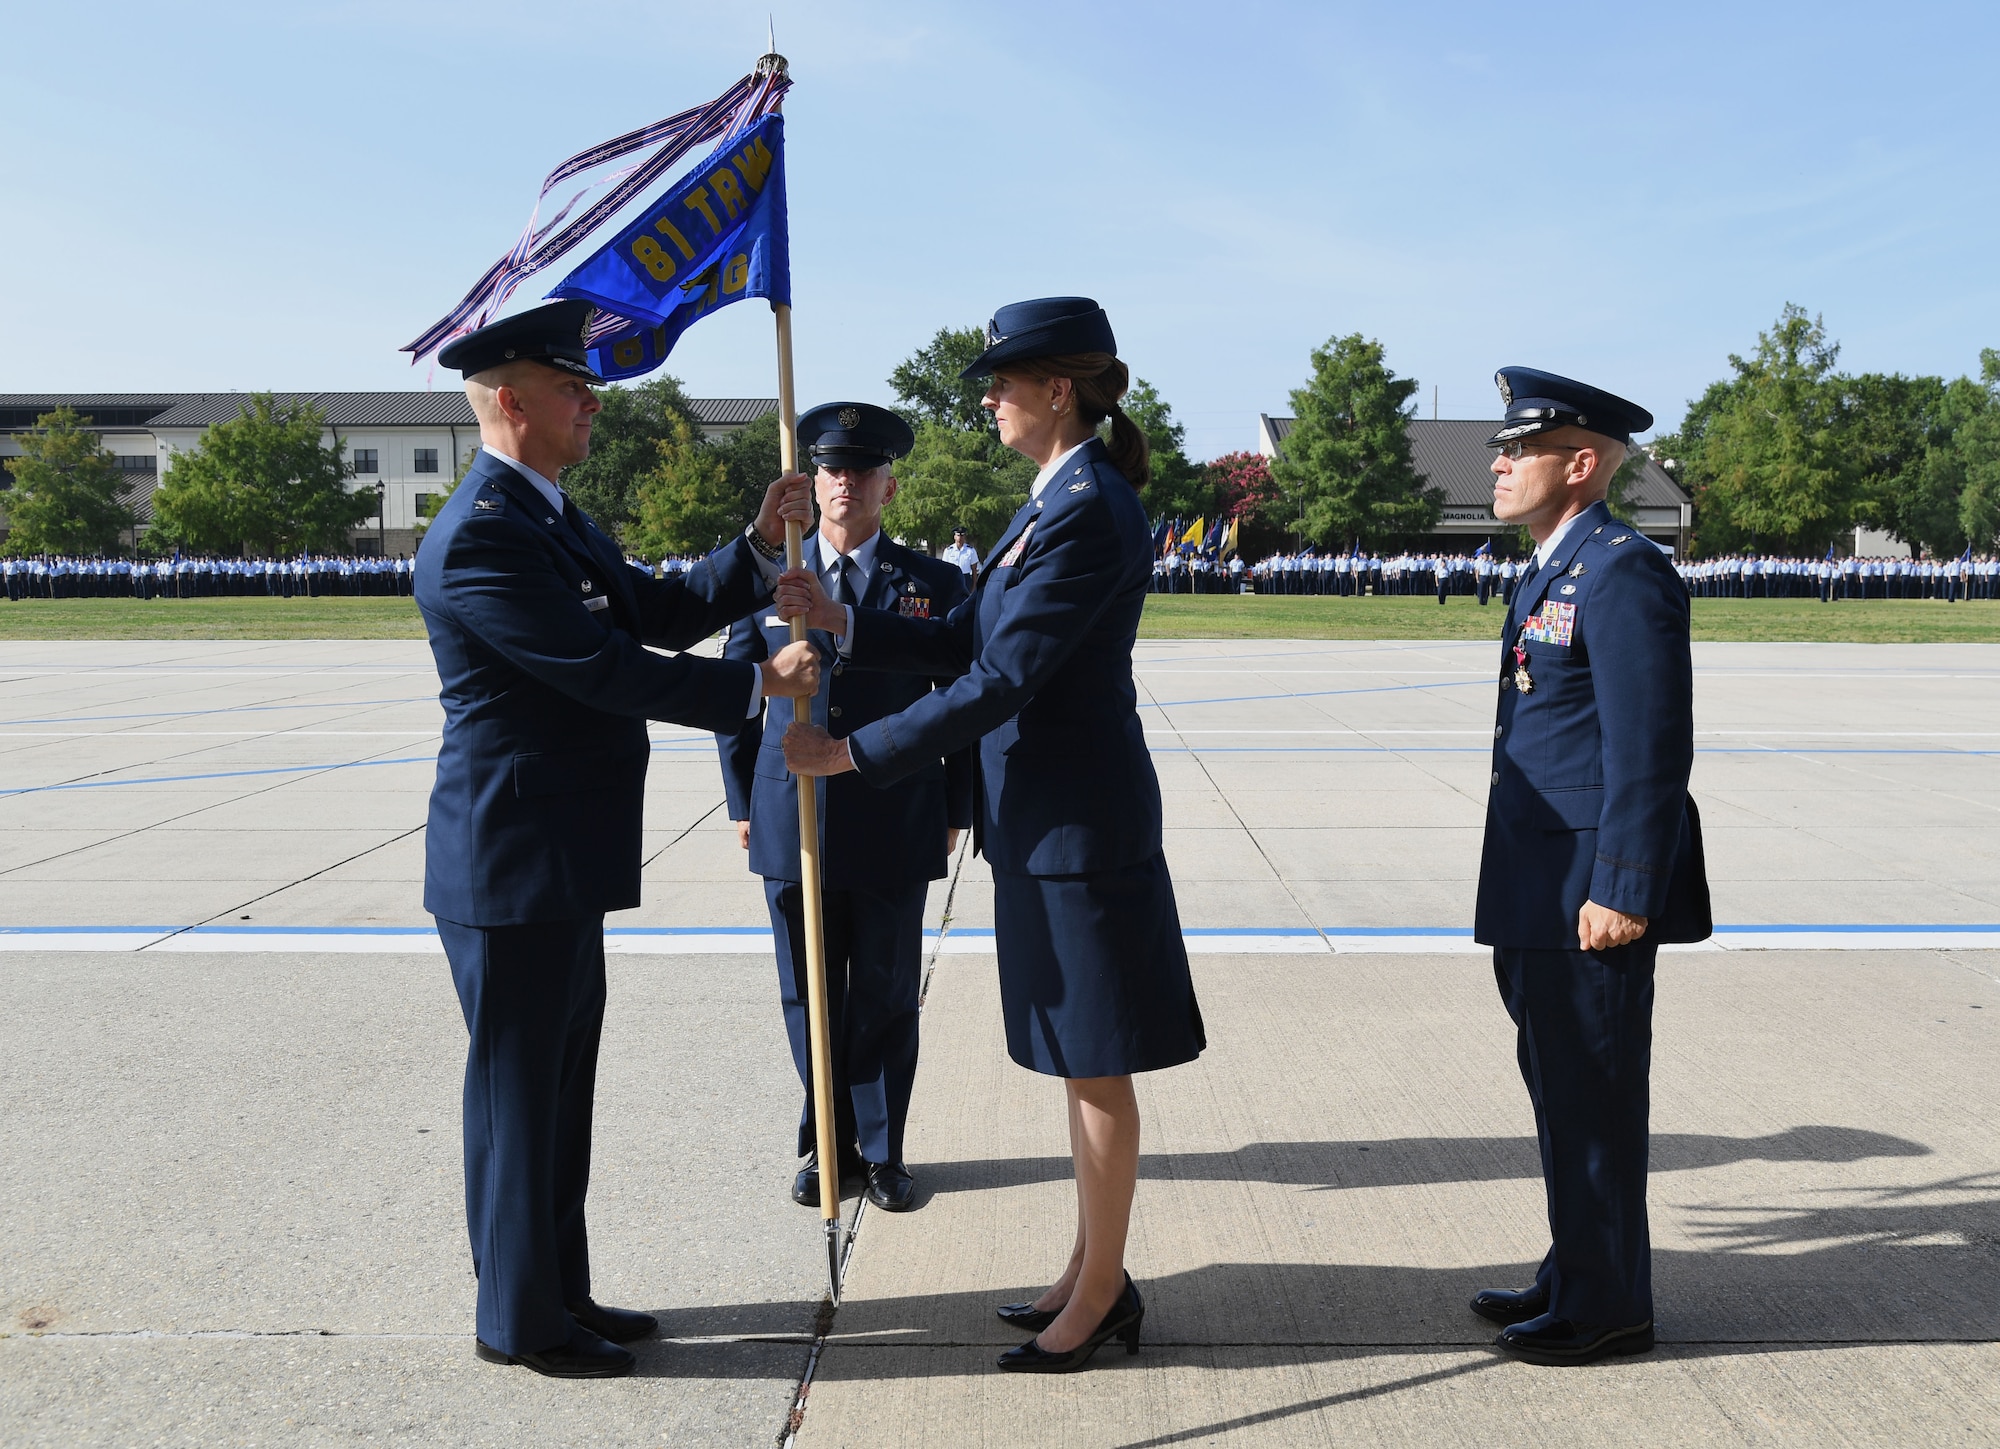 U.S. Air Force Col. William Hunter, 81st Training Wing commander, passes the guidon to Col. Laura King, incoming 81st Training Group commander, as Col. Chance Geray, outgoing 81st TRG commander, stands by during the 81st TRG Change of Command Ceremony on the Levitow Training Support Facility drill pad at Keesler Air Force Base, Mississippi, June 15, 2022. The ceremony is a symbol of command being exchanged from one commander to the next. (U.S. Air Force photo by Kemberly Groue)